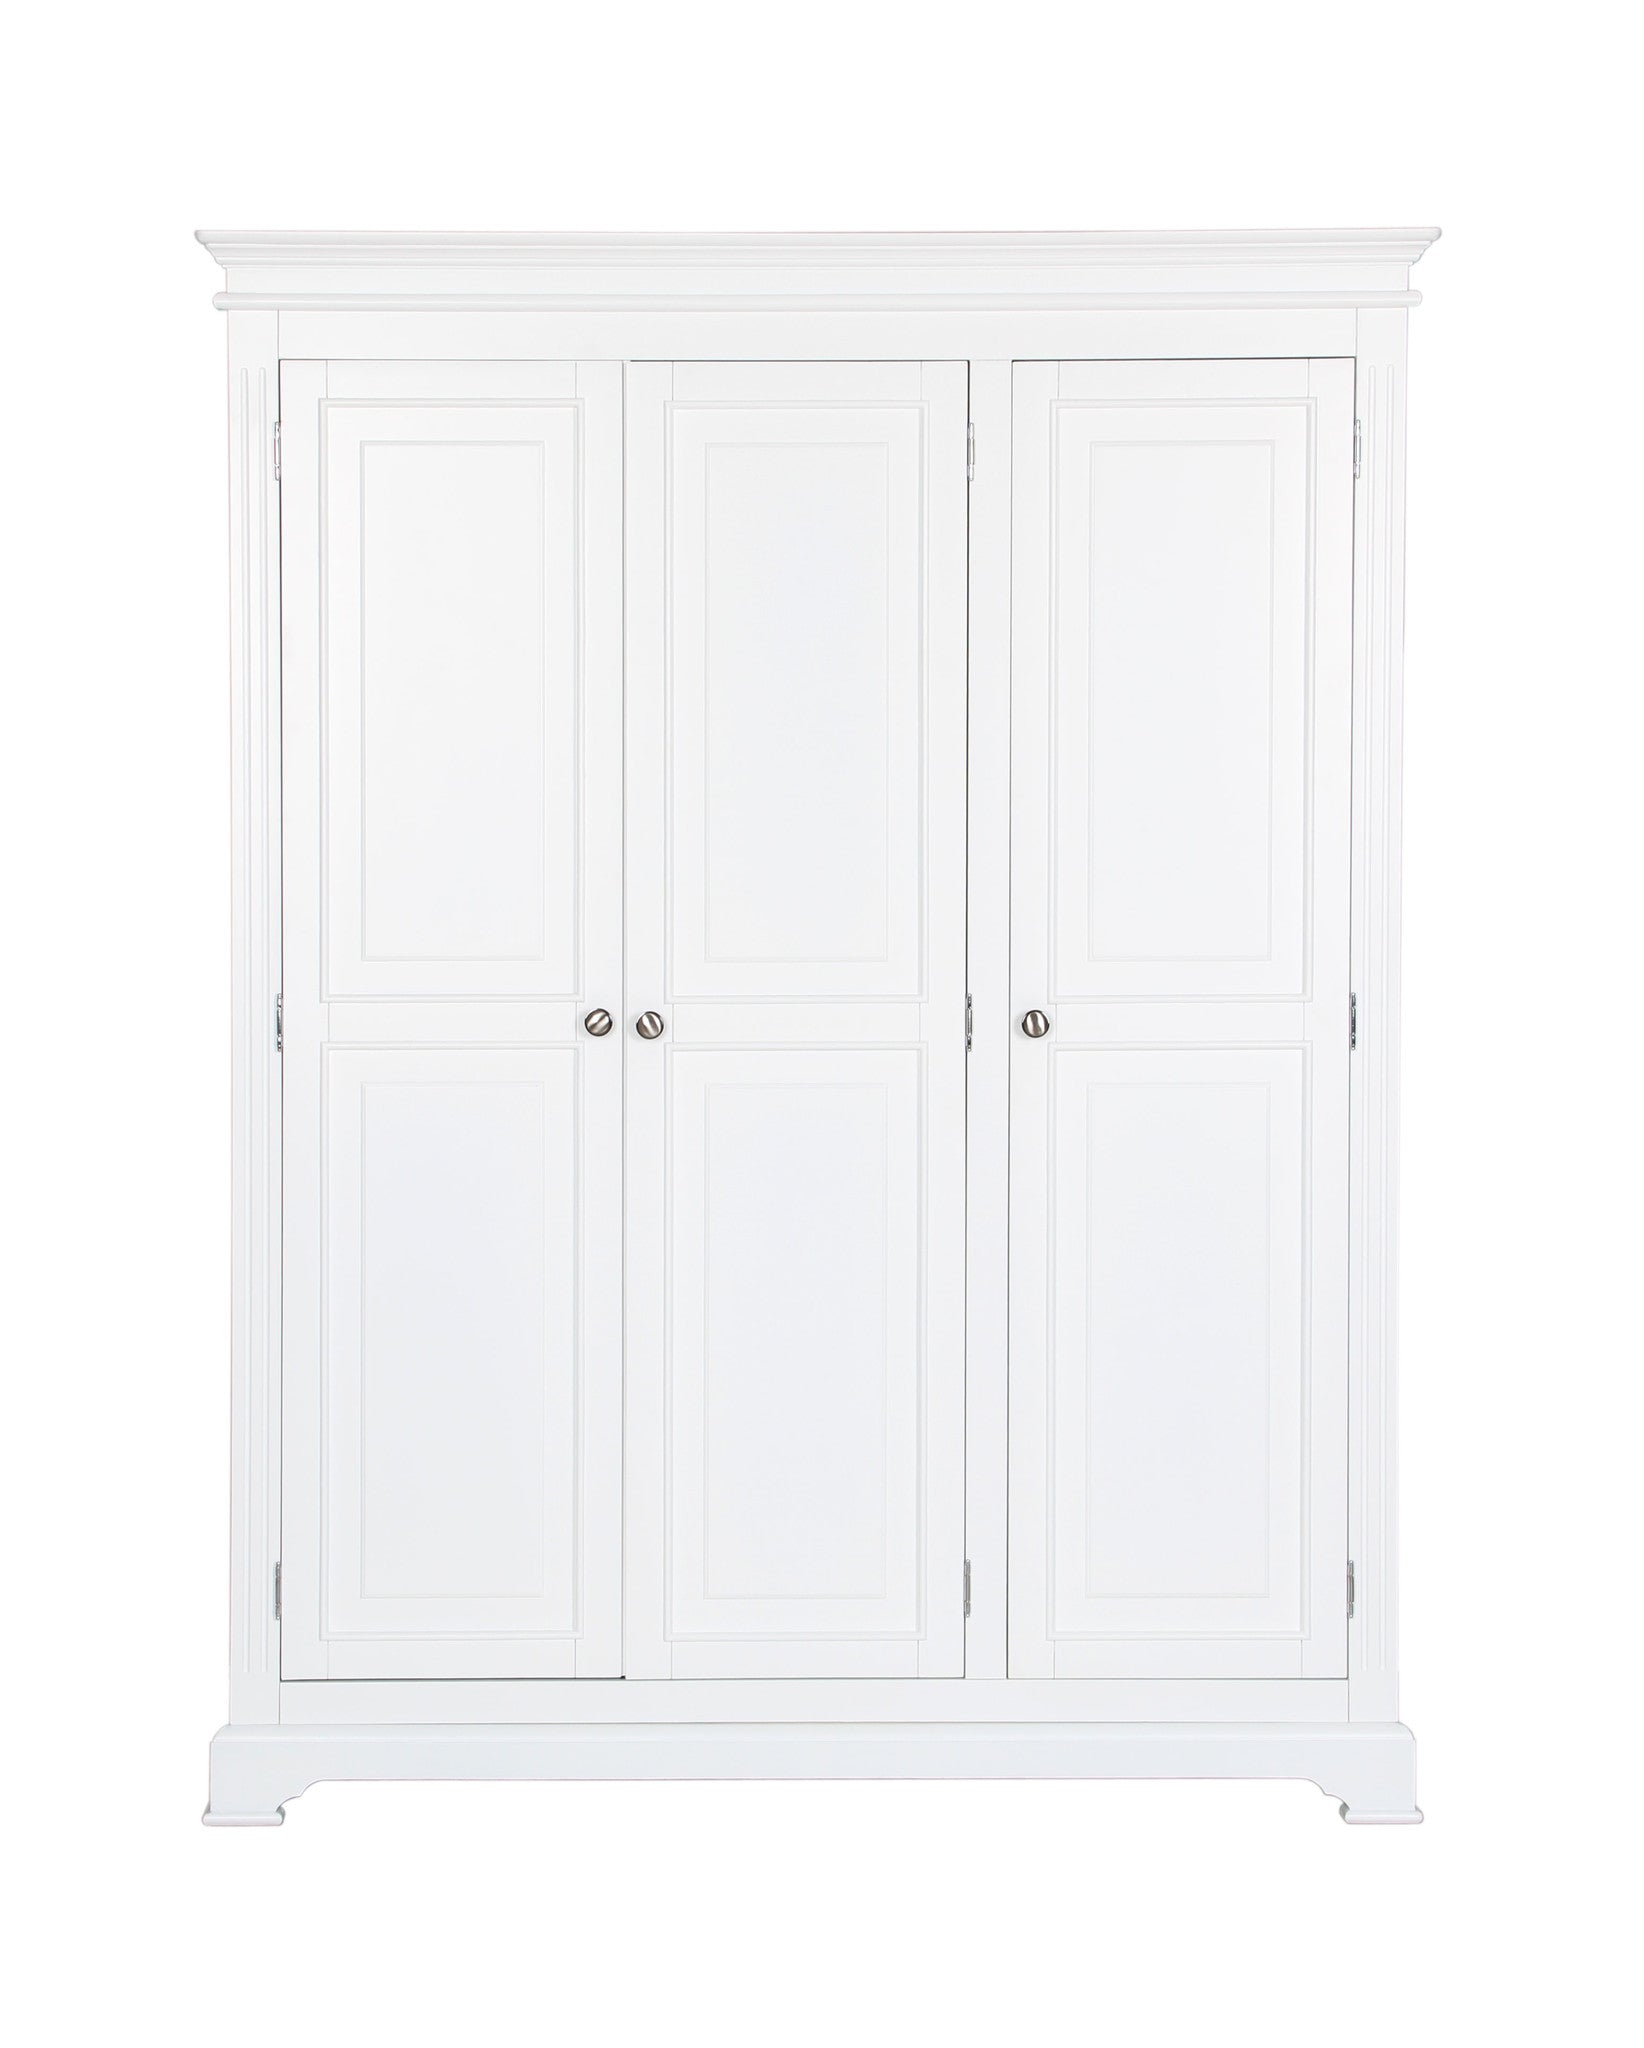 Painted White 3 door wardrobe by Cheshire Bedrooms